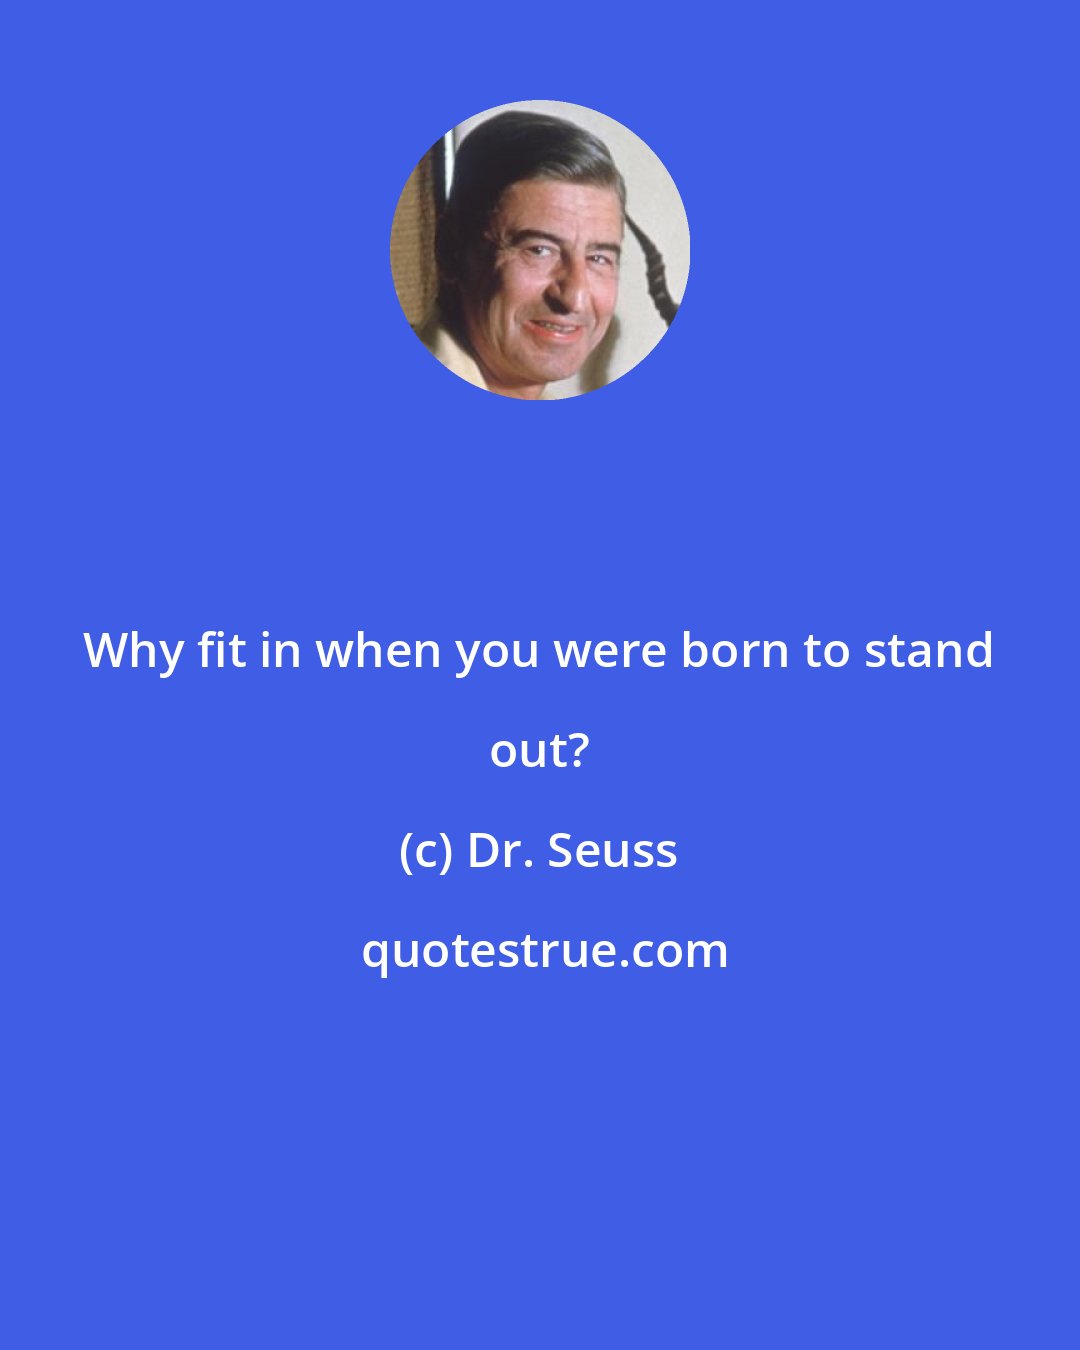 Dr. Seuss: Why fit in when you were born to stand out?